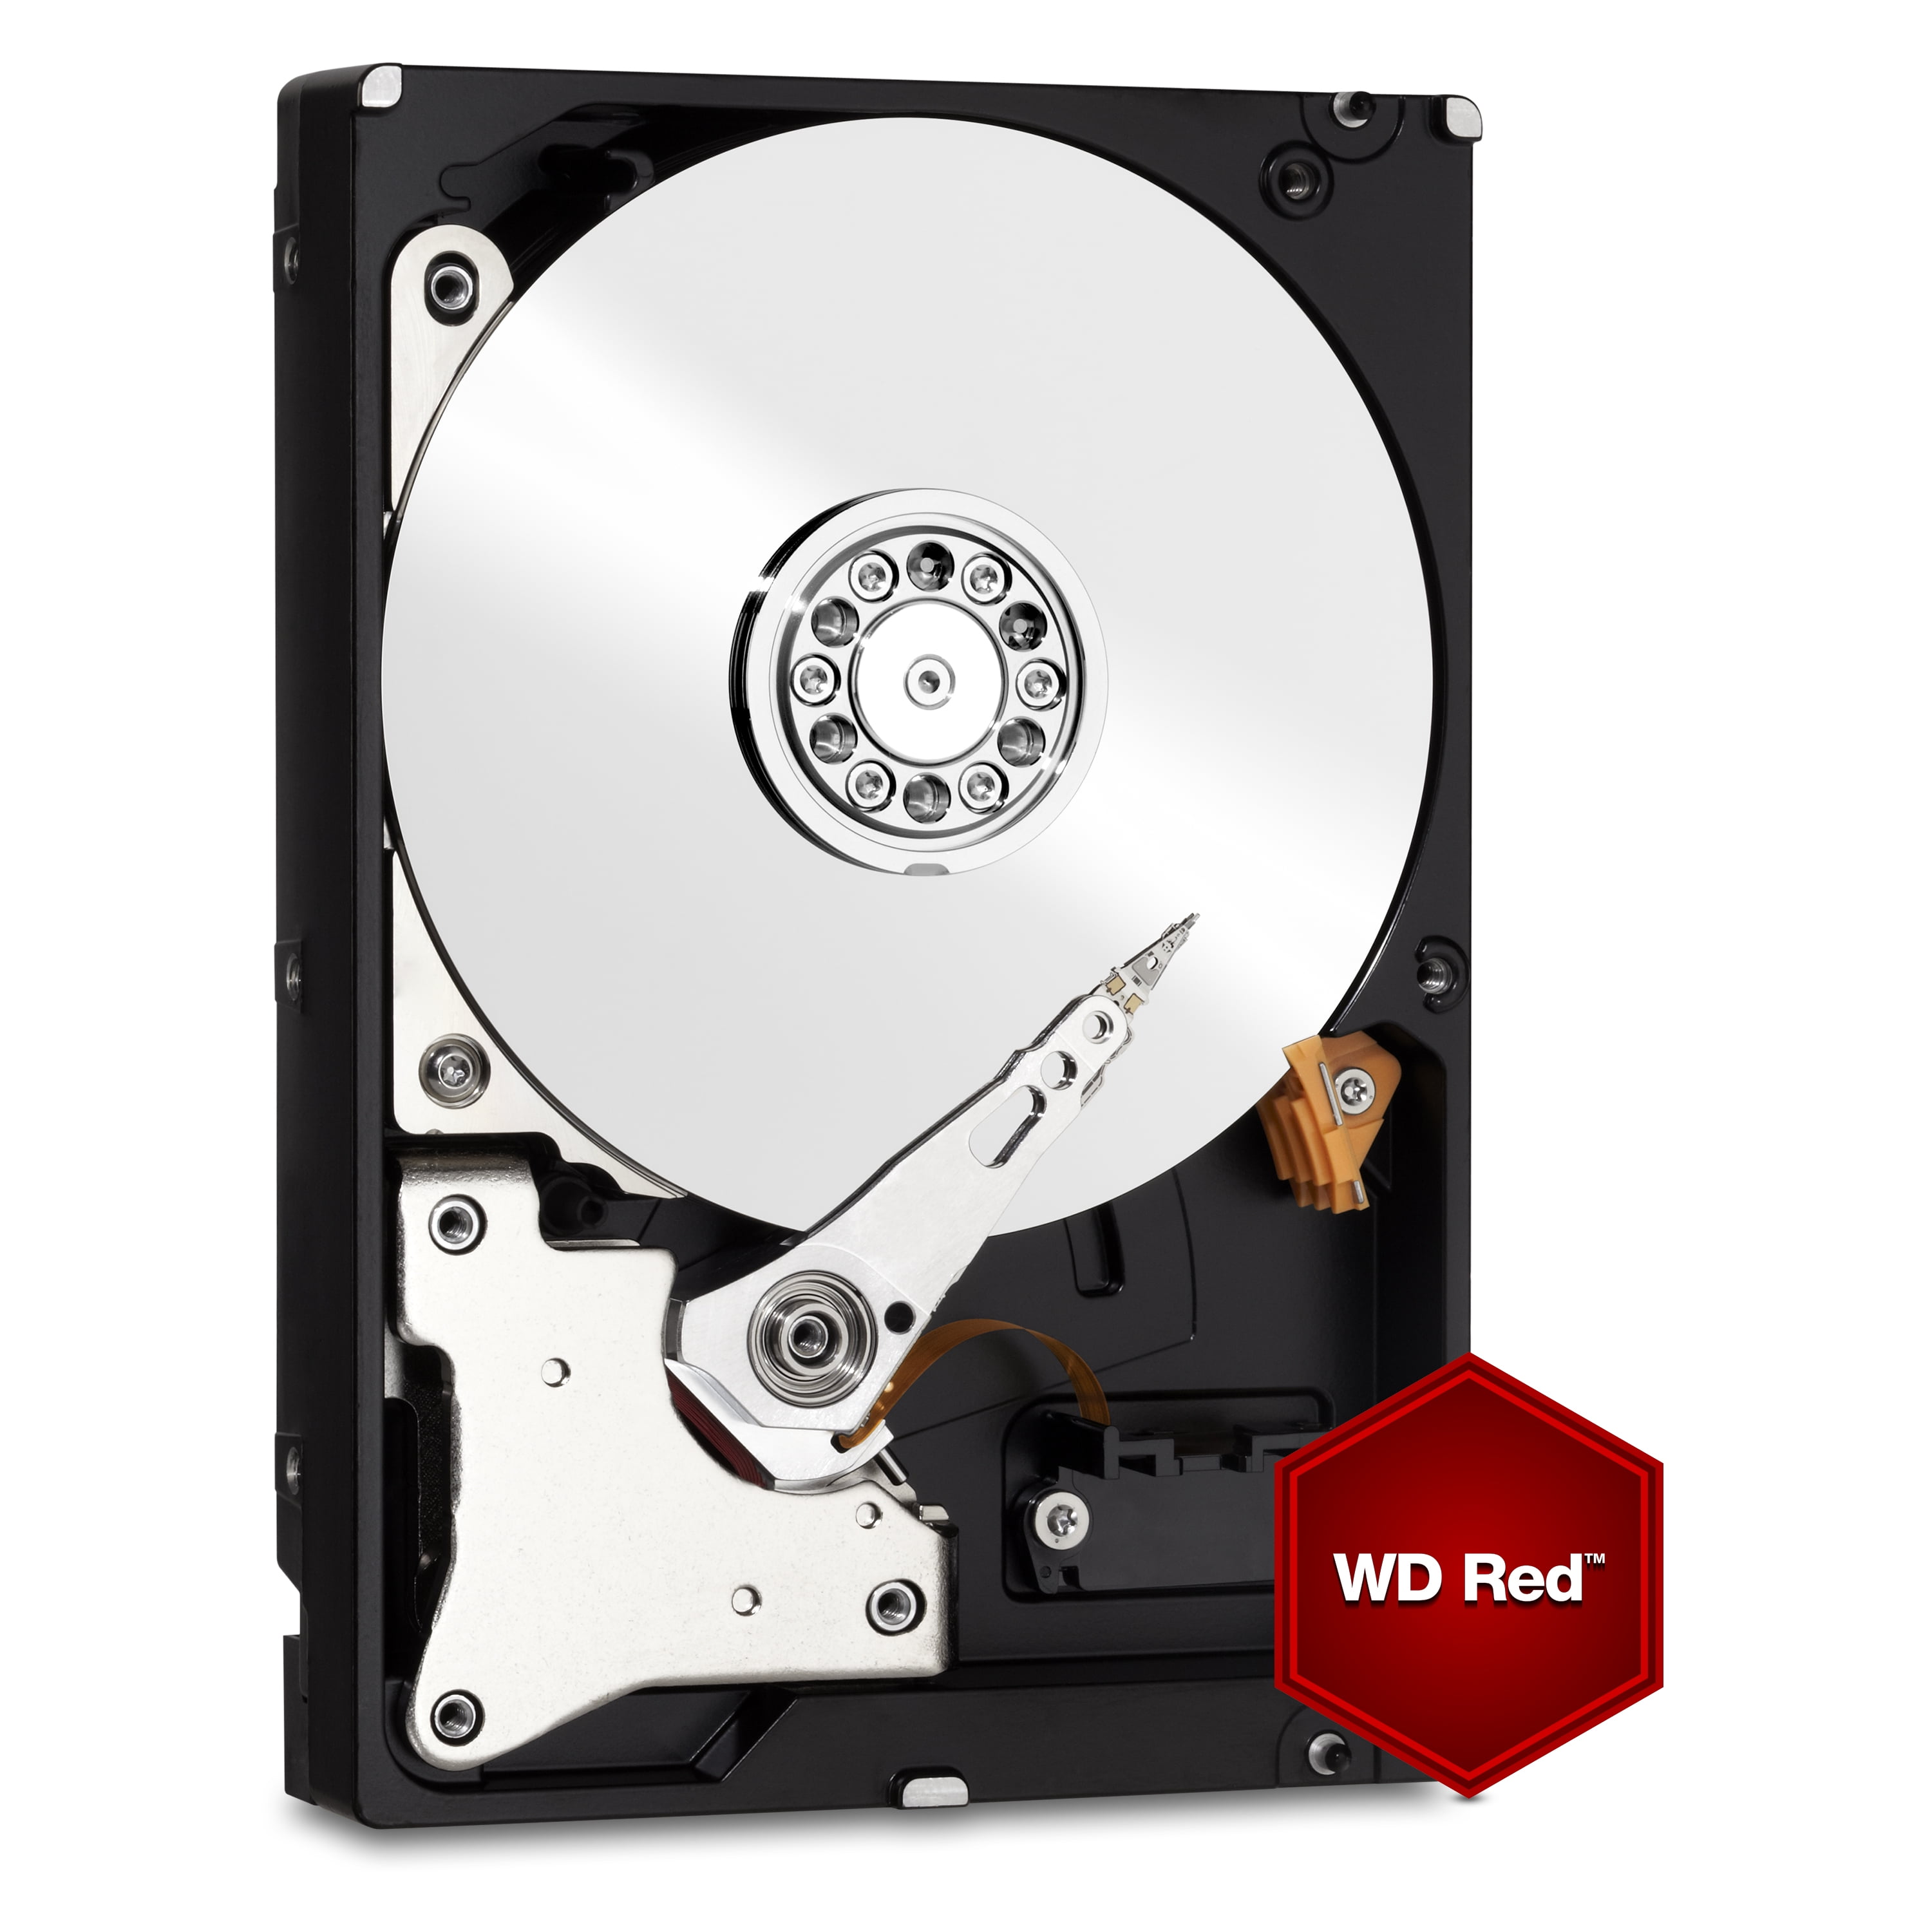 Red 4TB NAS Hard Disk Drive - 5400 RPM Class SATA 6Gb/s 64MB Cache 3.5 Inch - WD40EFRX -